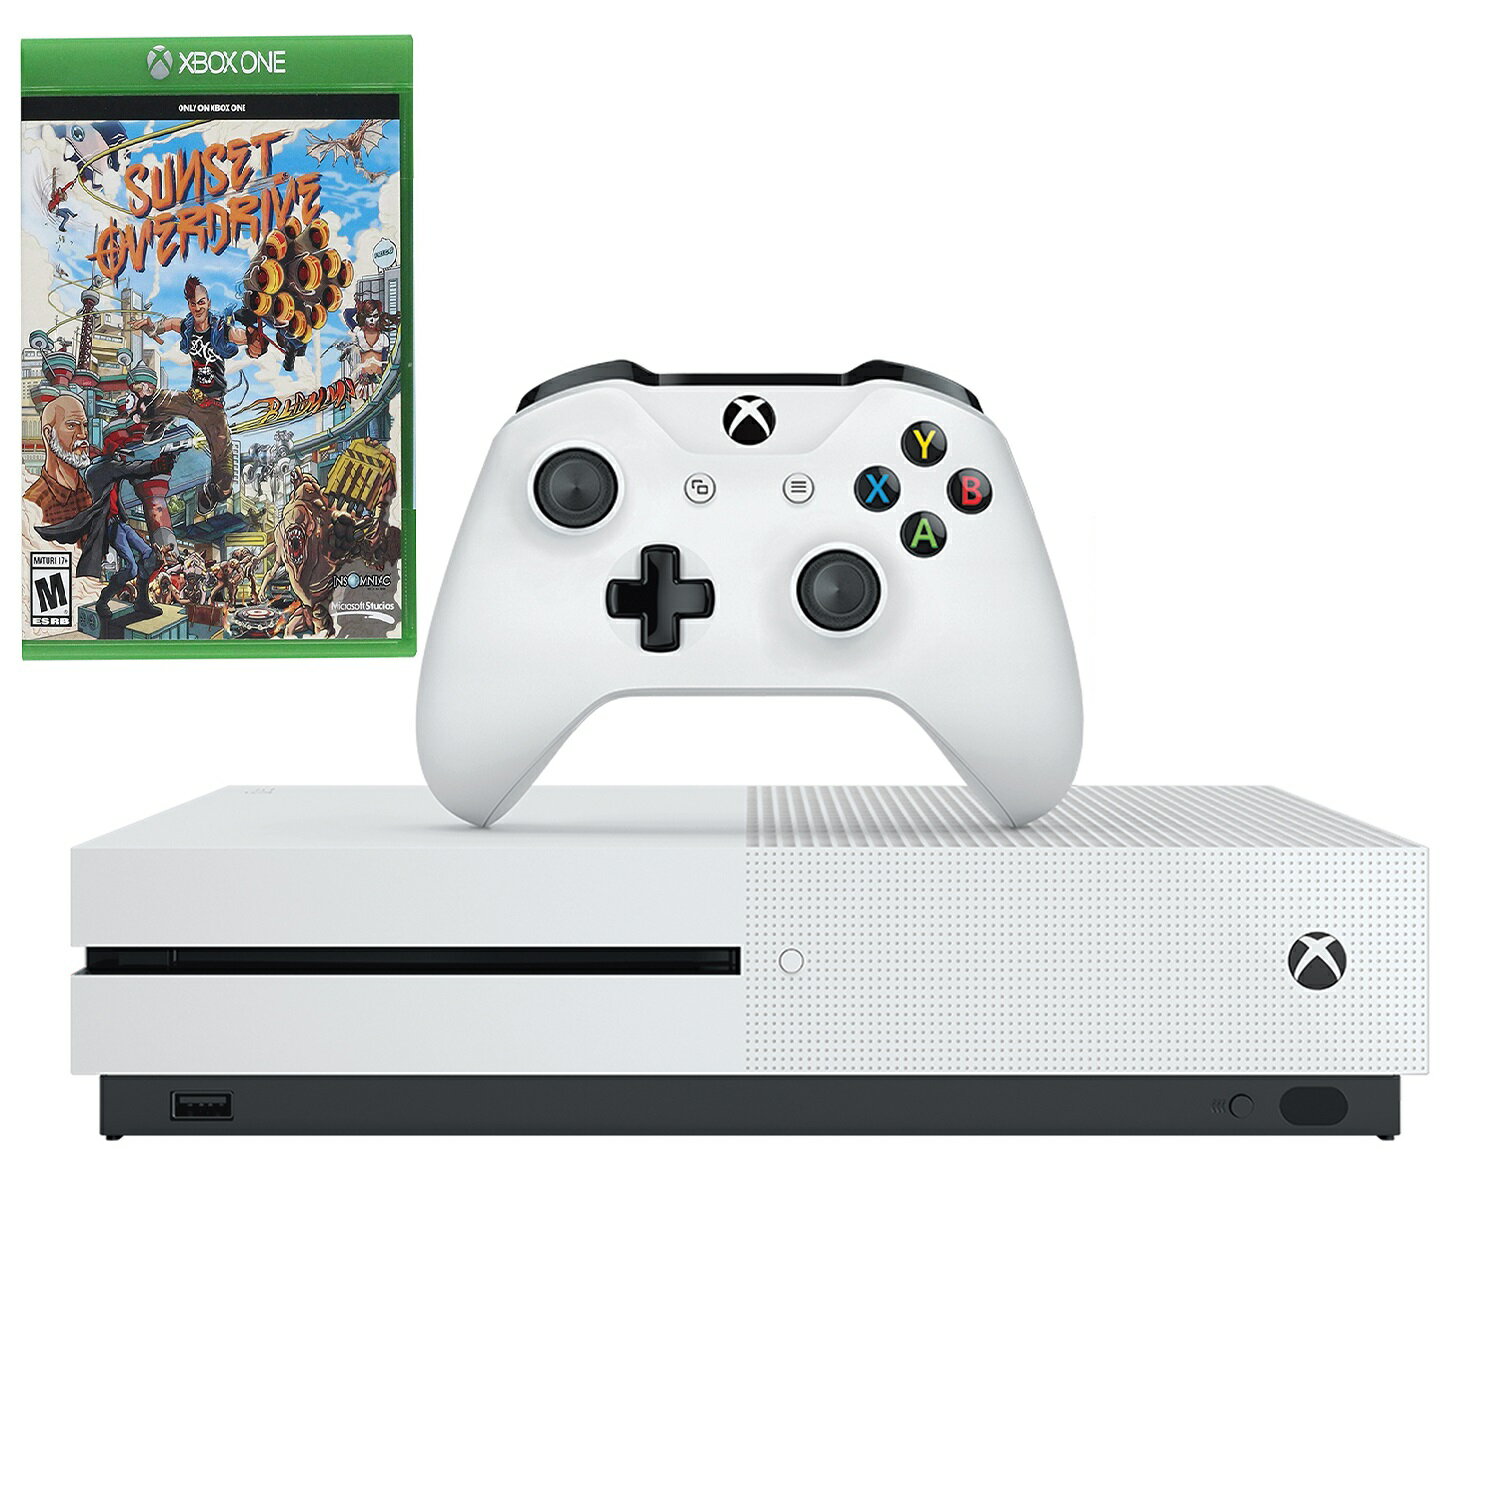 Microsoft Xbox One S 1TB White Console & Sunset Overdrive Video Game